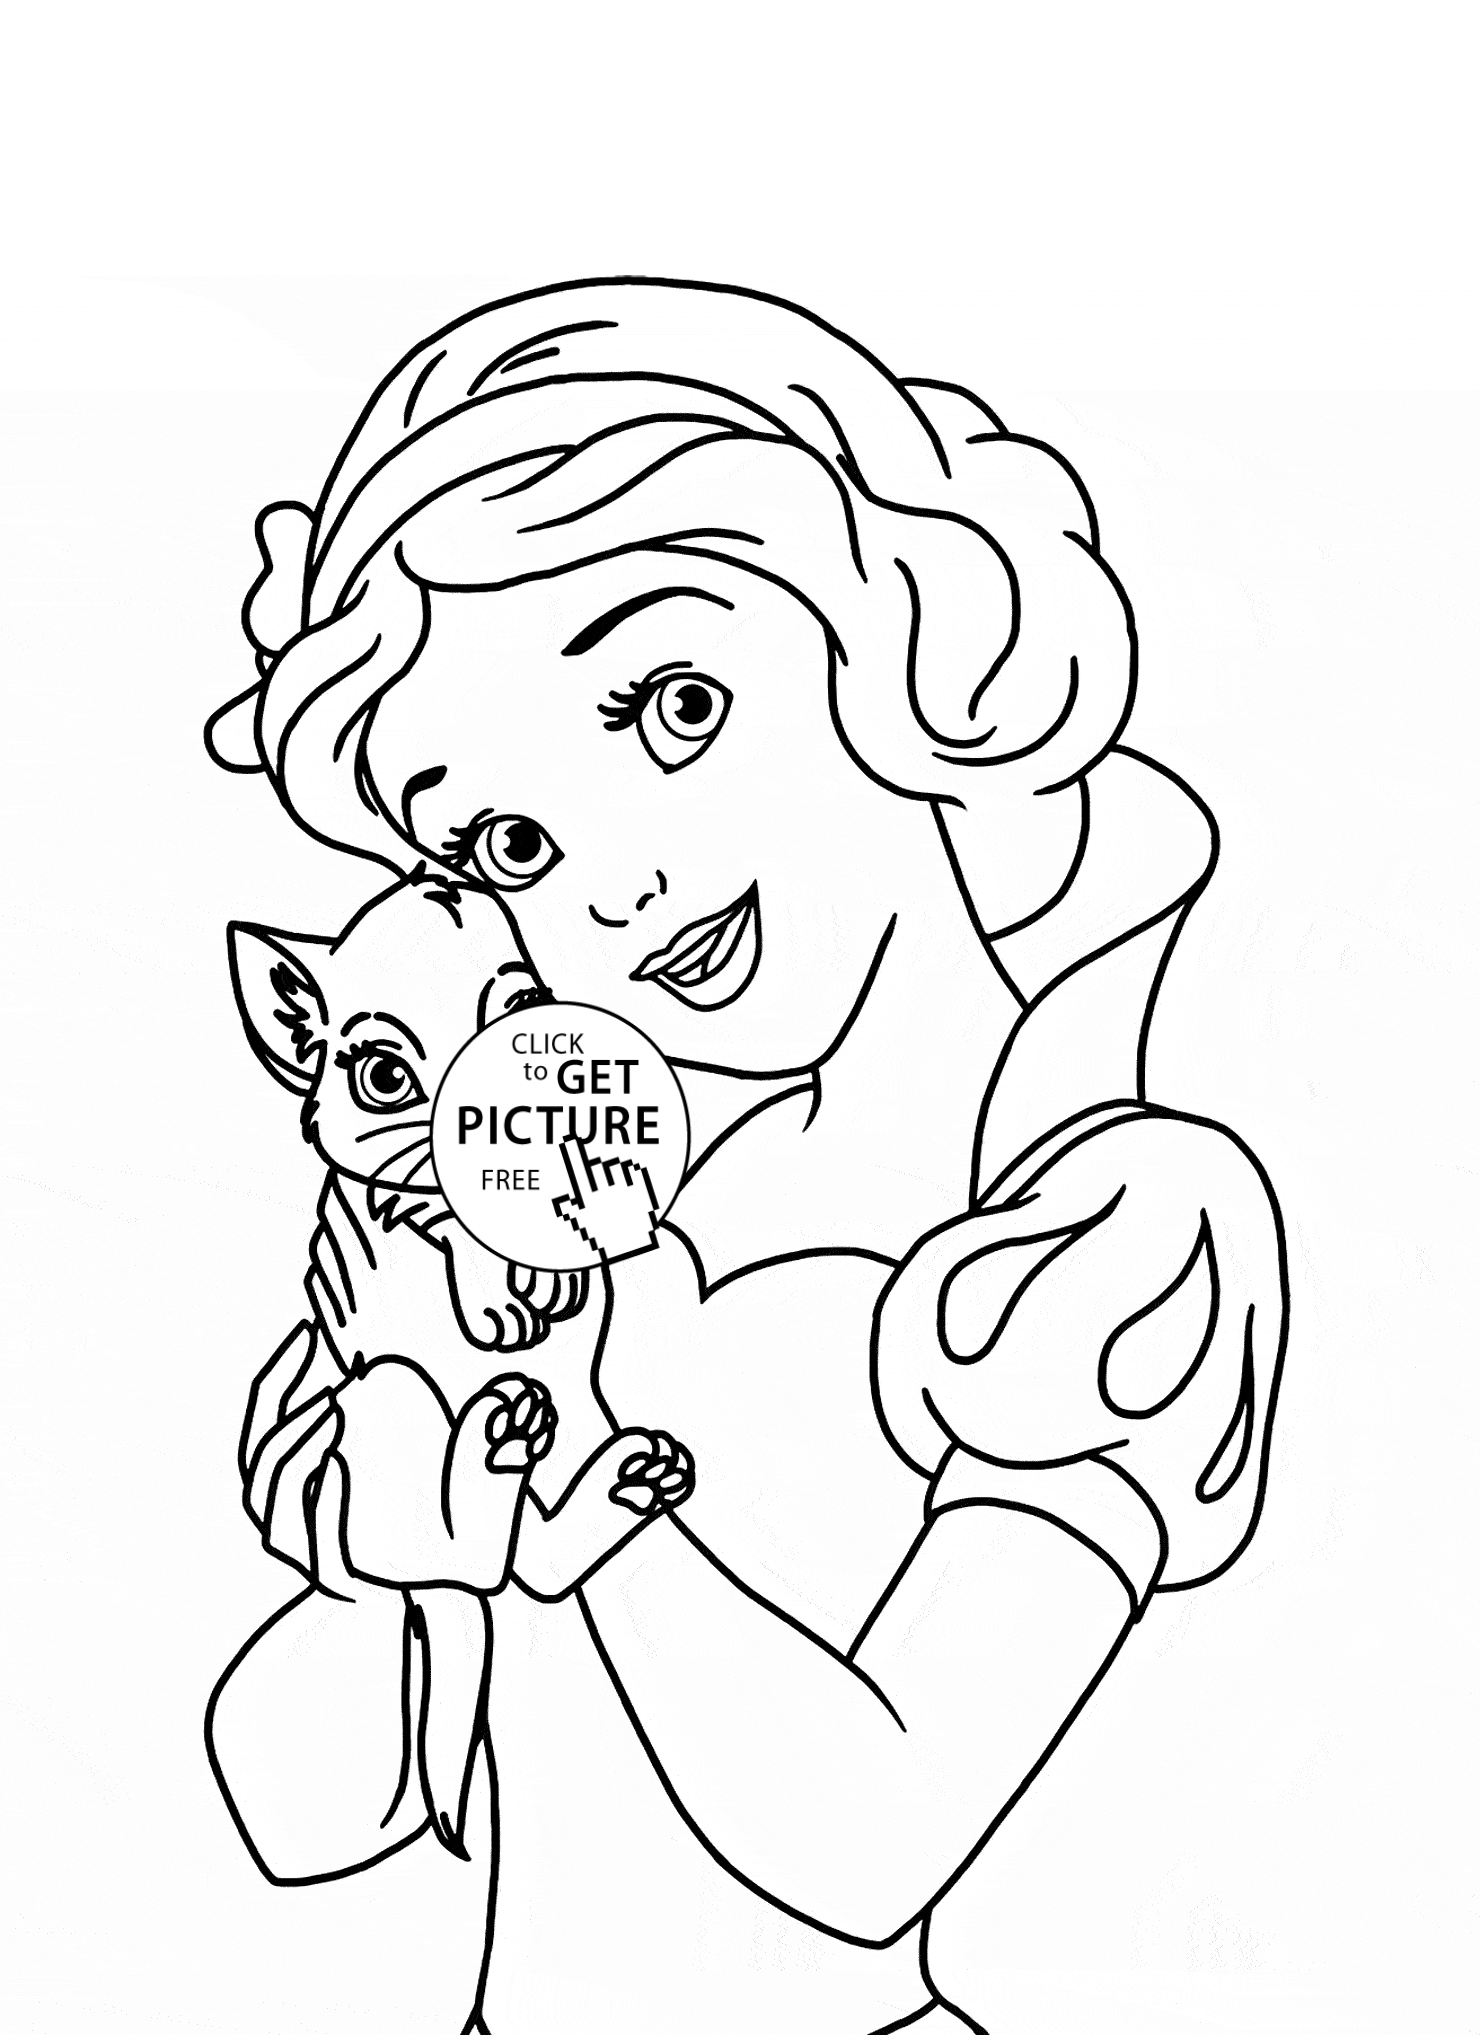 Princess Cat Coloring Page - Coloring Home